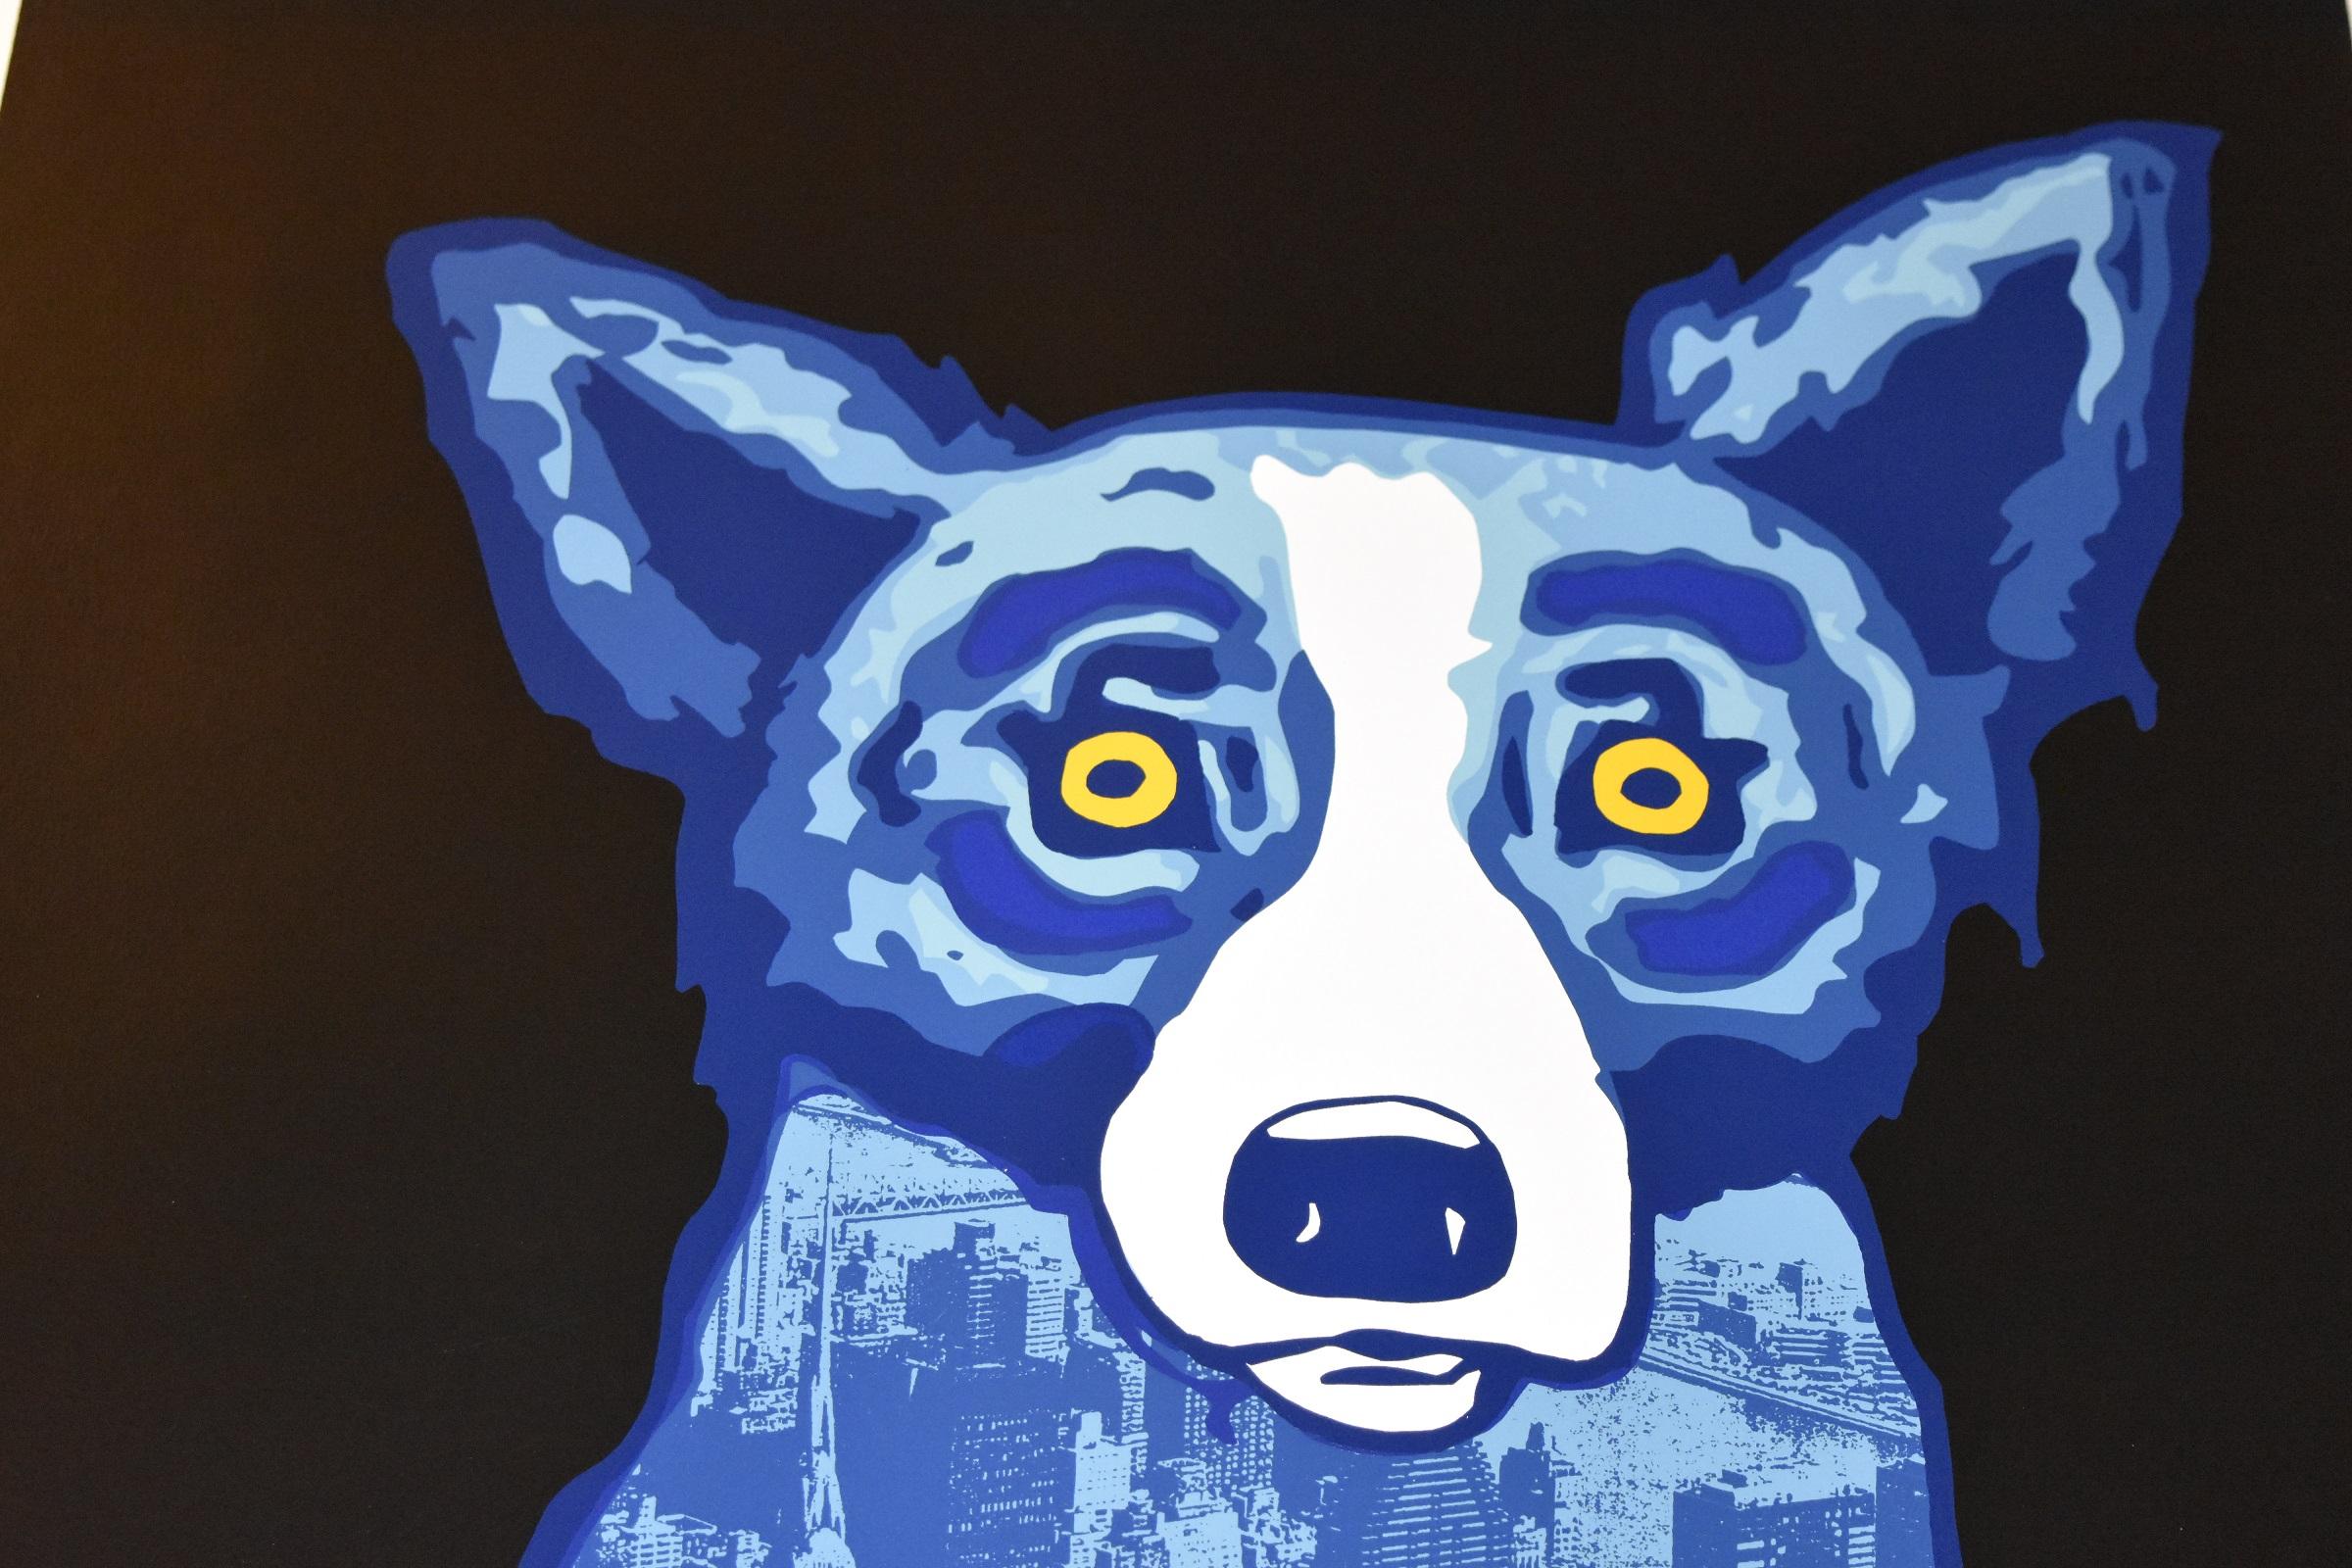 This Blue Dog work consists of 1 dog on a black background.  Up close you can see a major city displayed in the body of the dog. The dog has soulful yellow eyes. This pop art original silkscreen print on paper is guaranteed authentic and hand